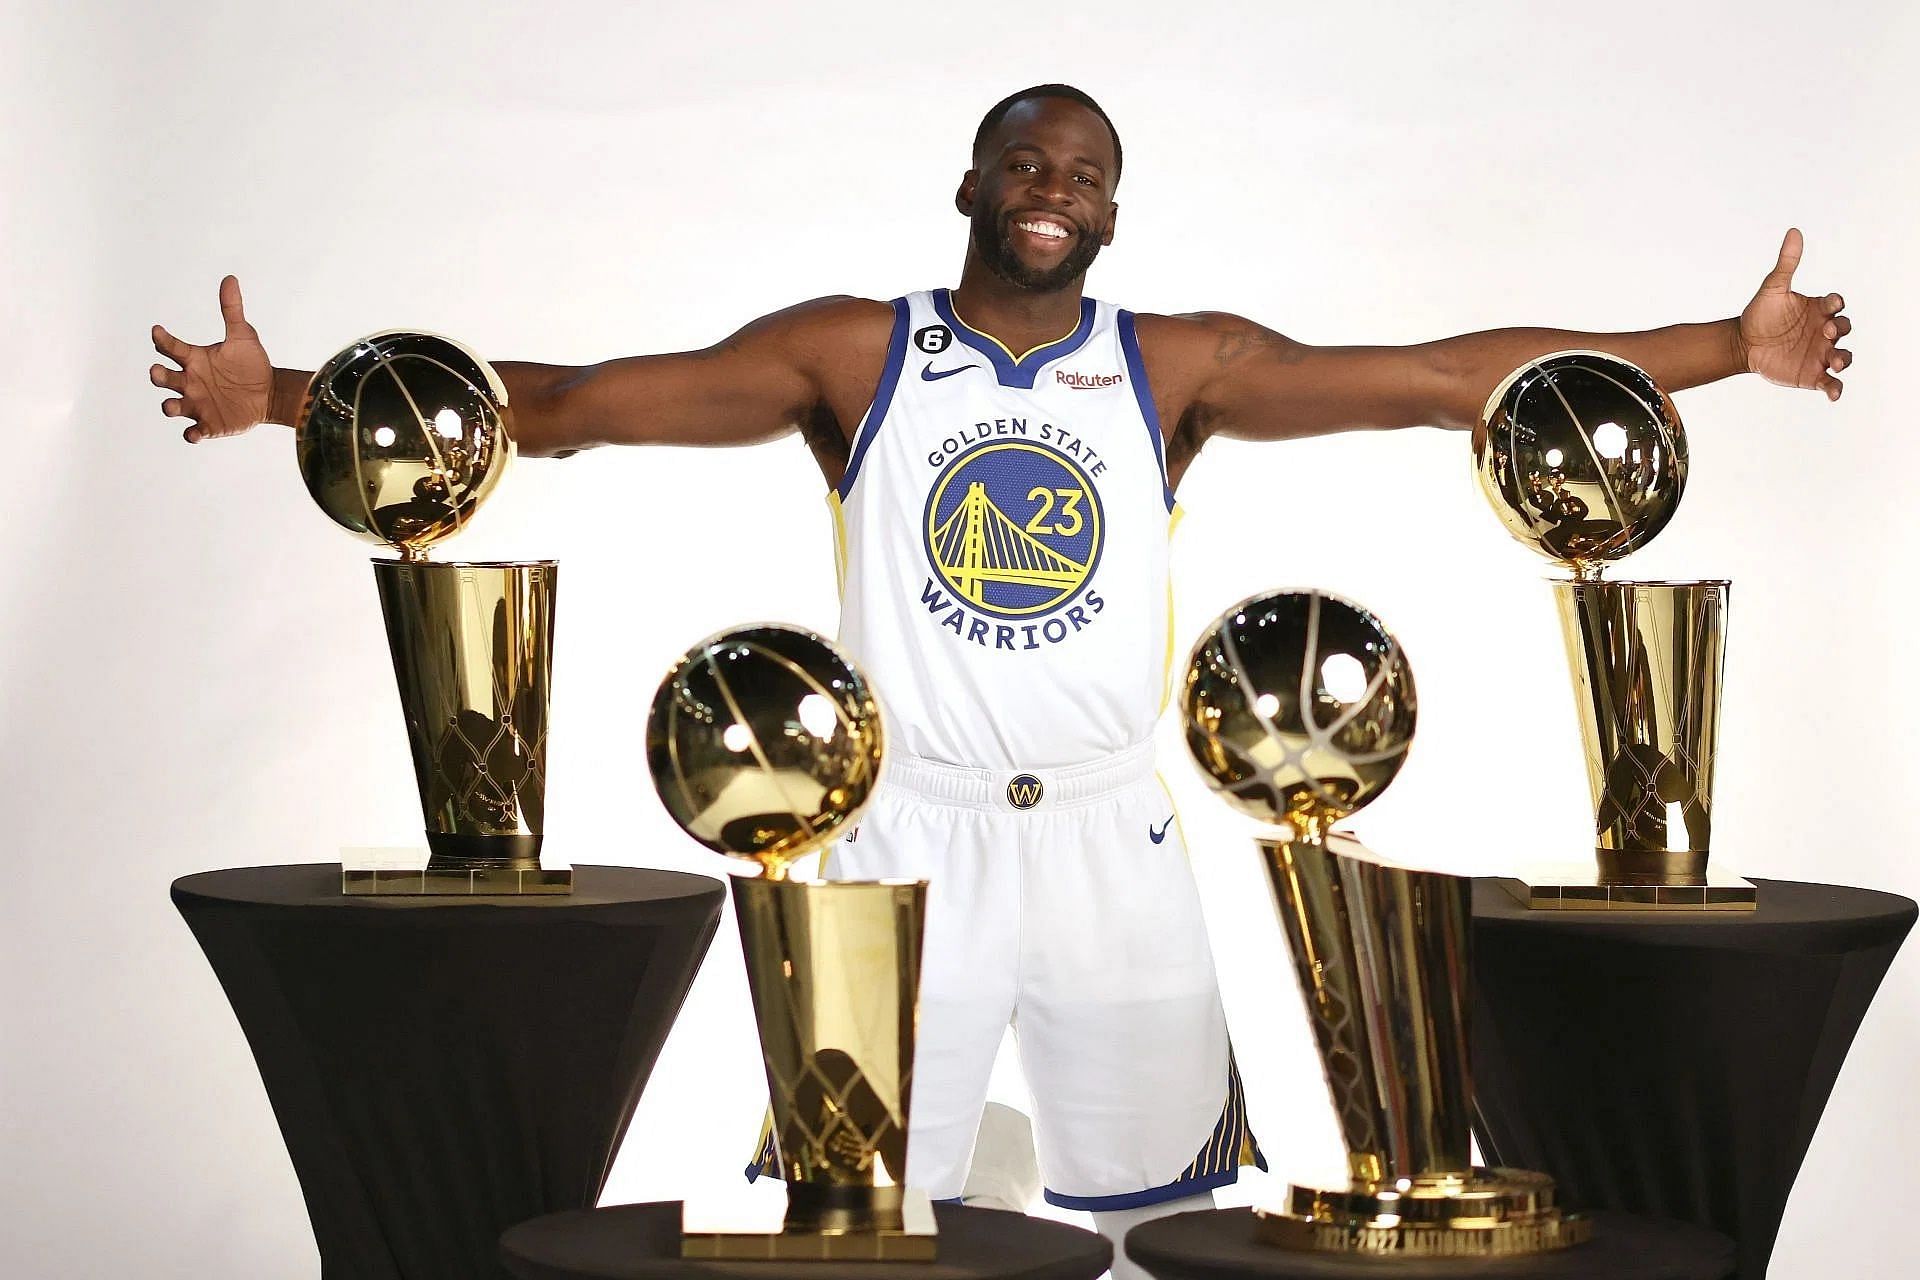 Golden State All-Star Draymond Green is to sit out their remaining preseason games, the Warriors announced.